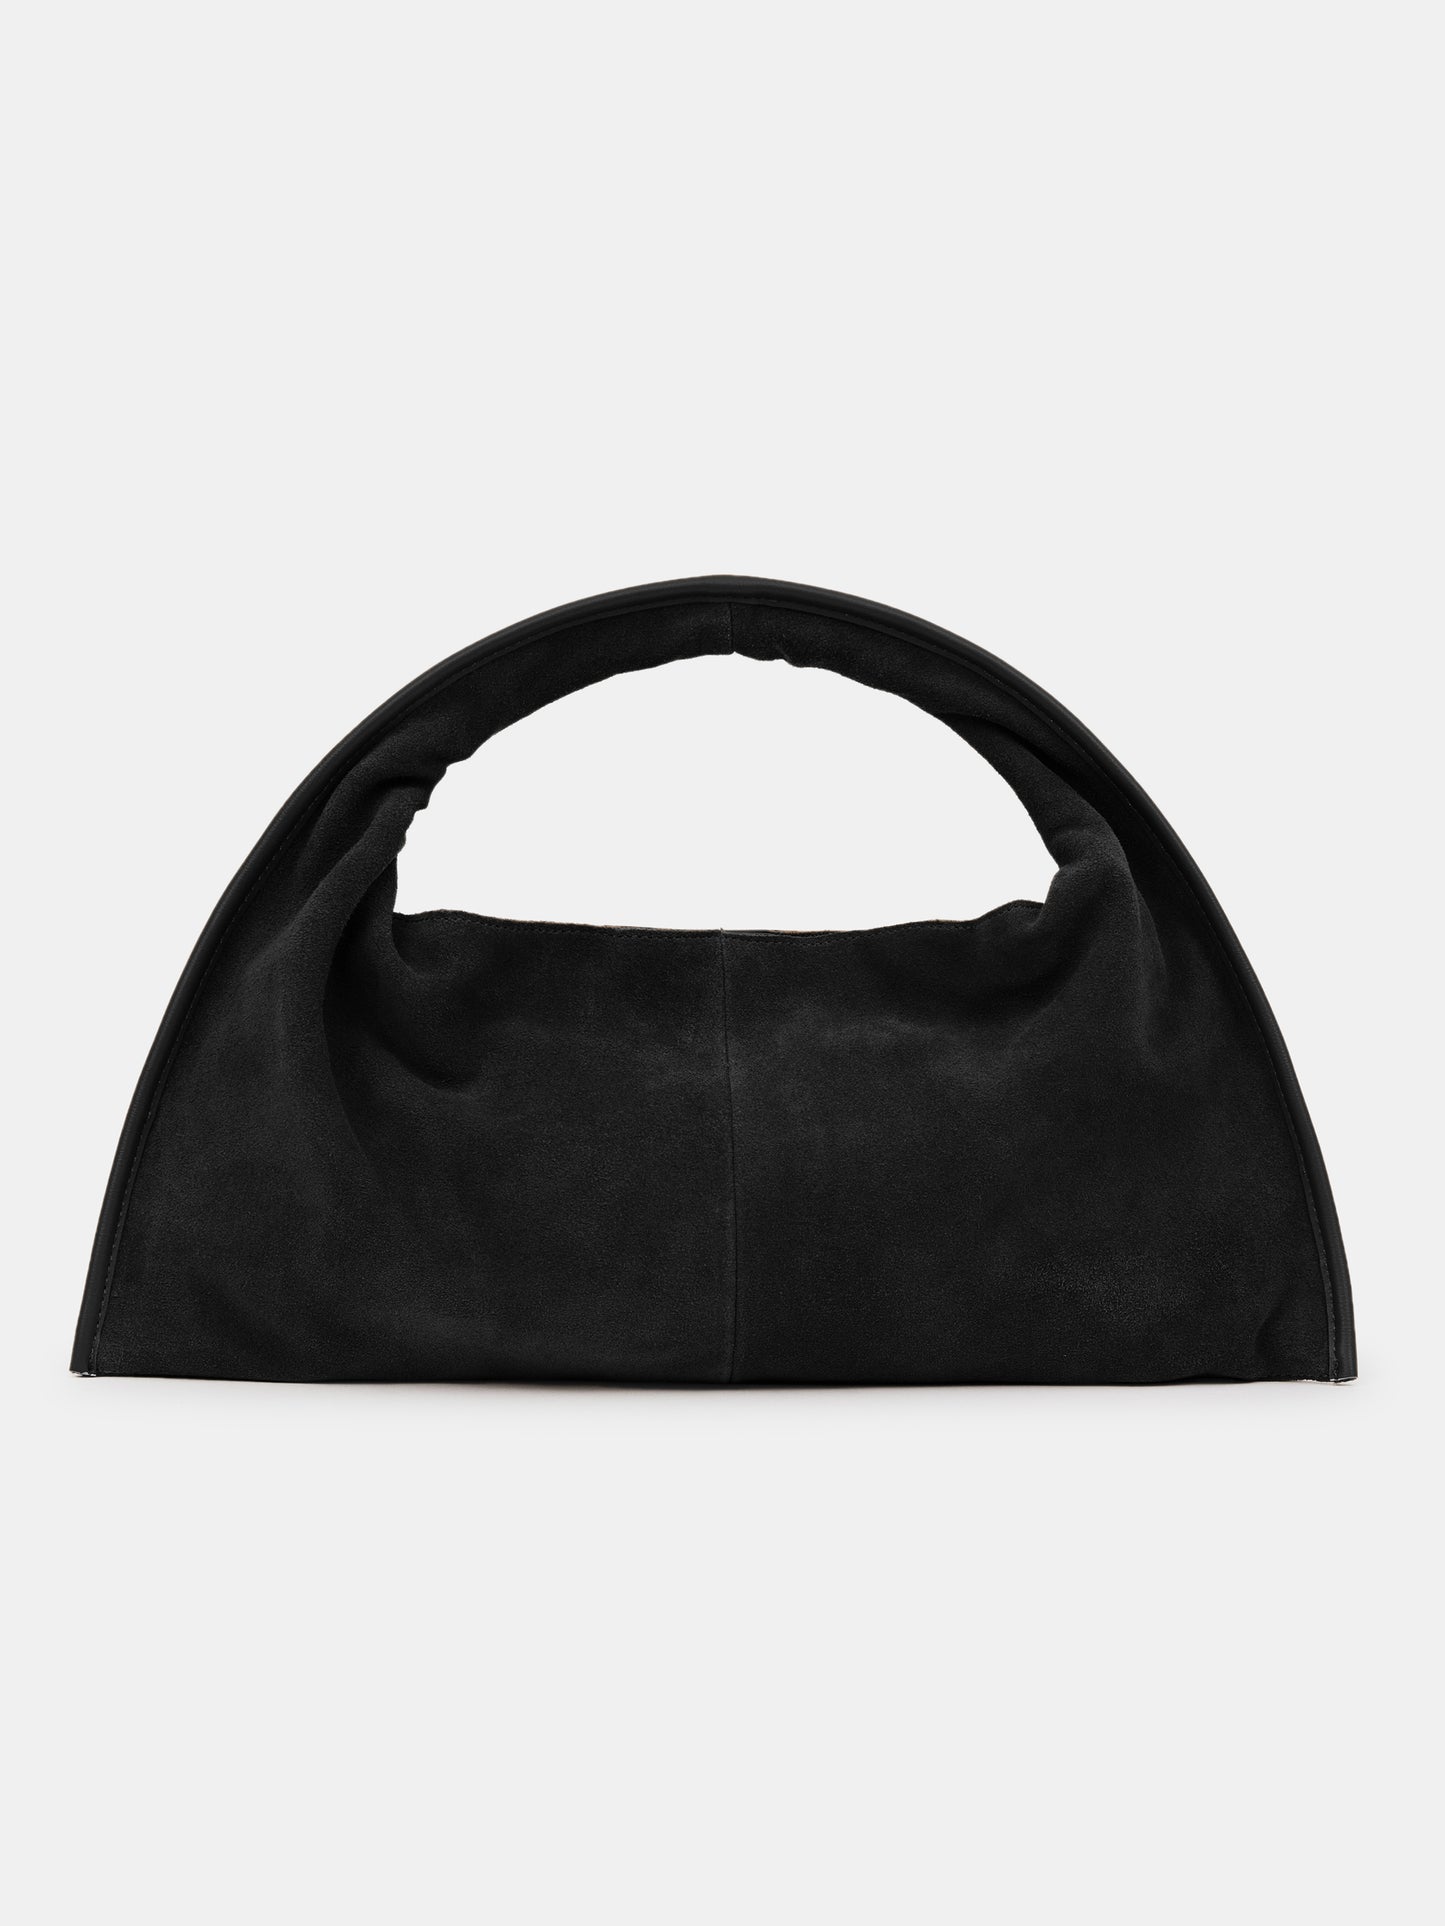 Double-Sided Tote Bag, Black/Black Suede